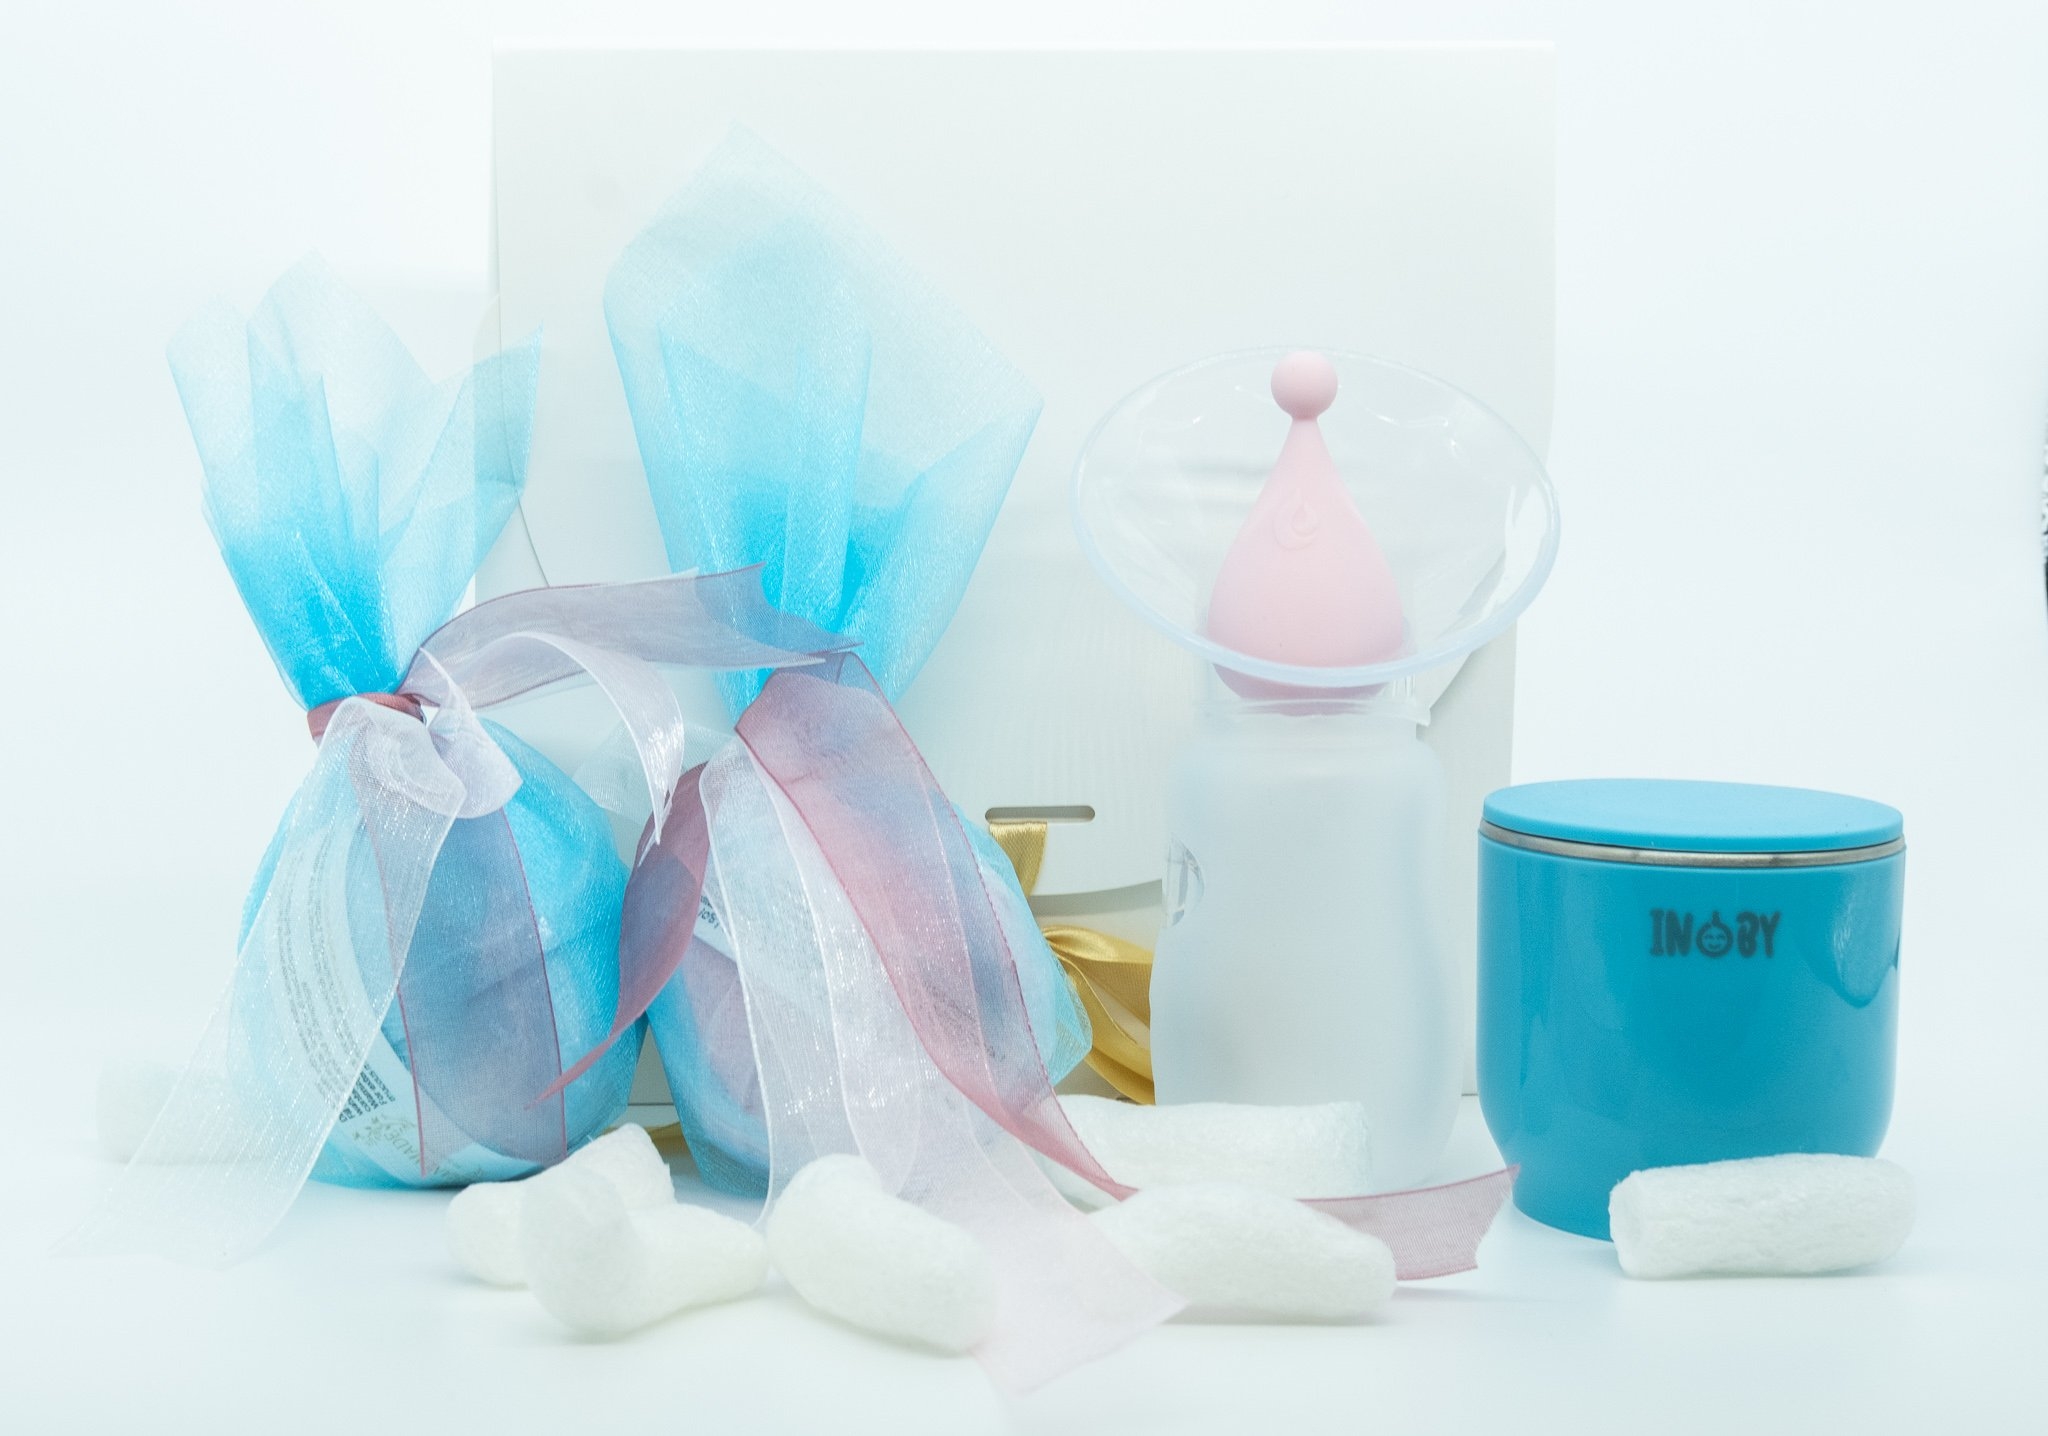 Buy New Parents Gift Sets Online | UK | Inoby Blue / Pink